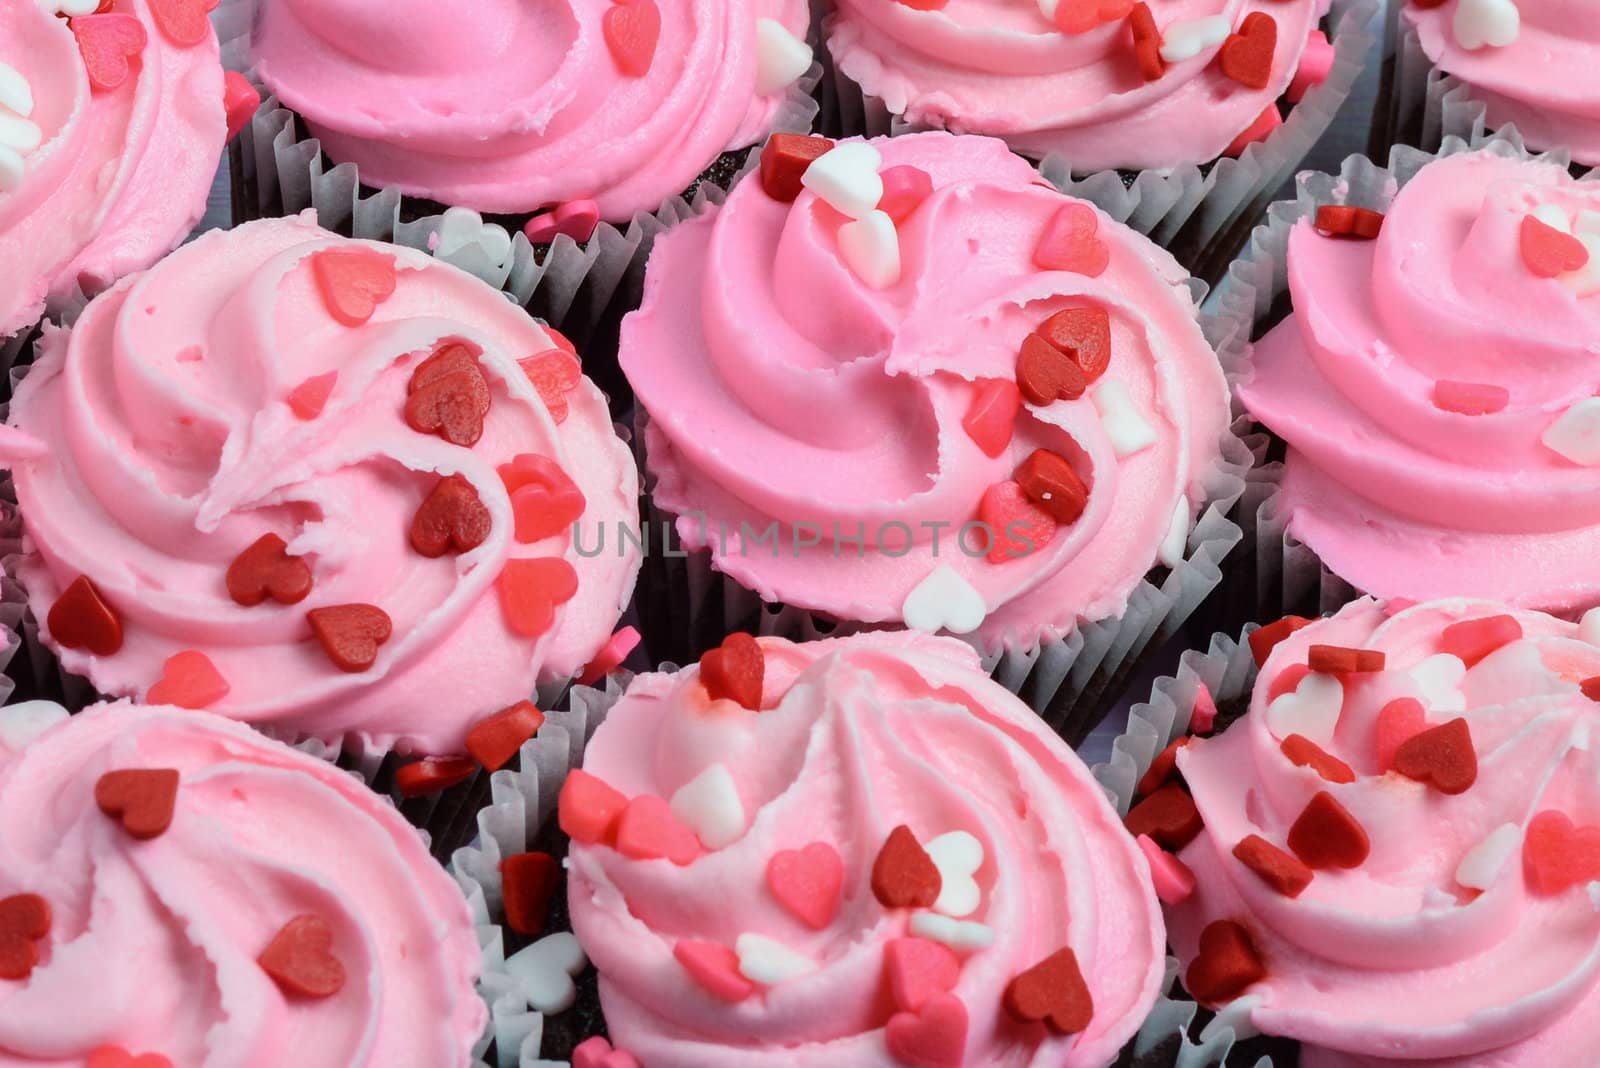 Pink Cupcakes Close Up by bbourdages